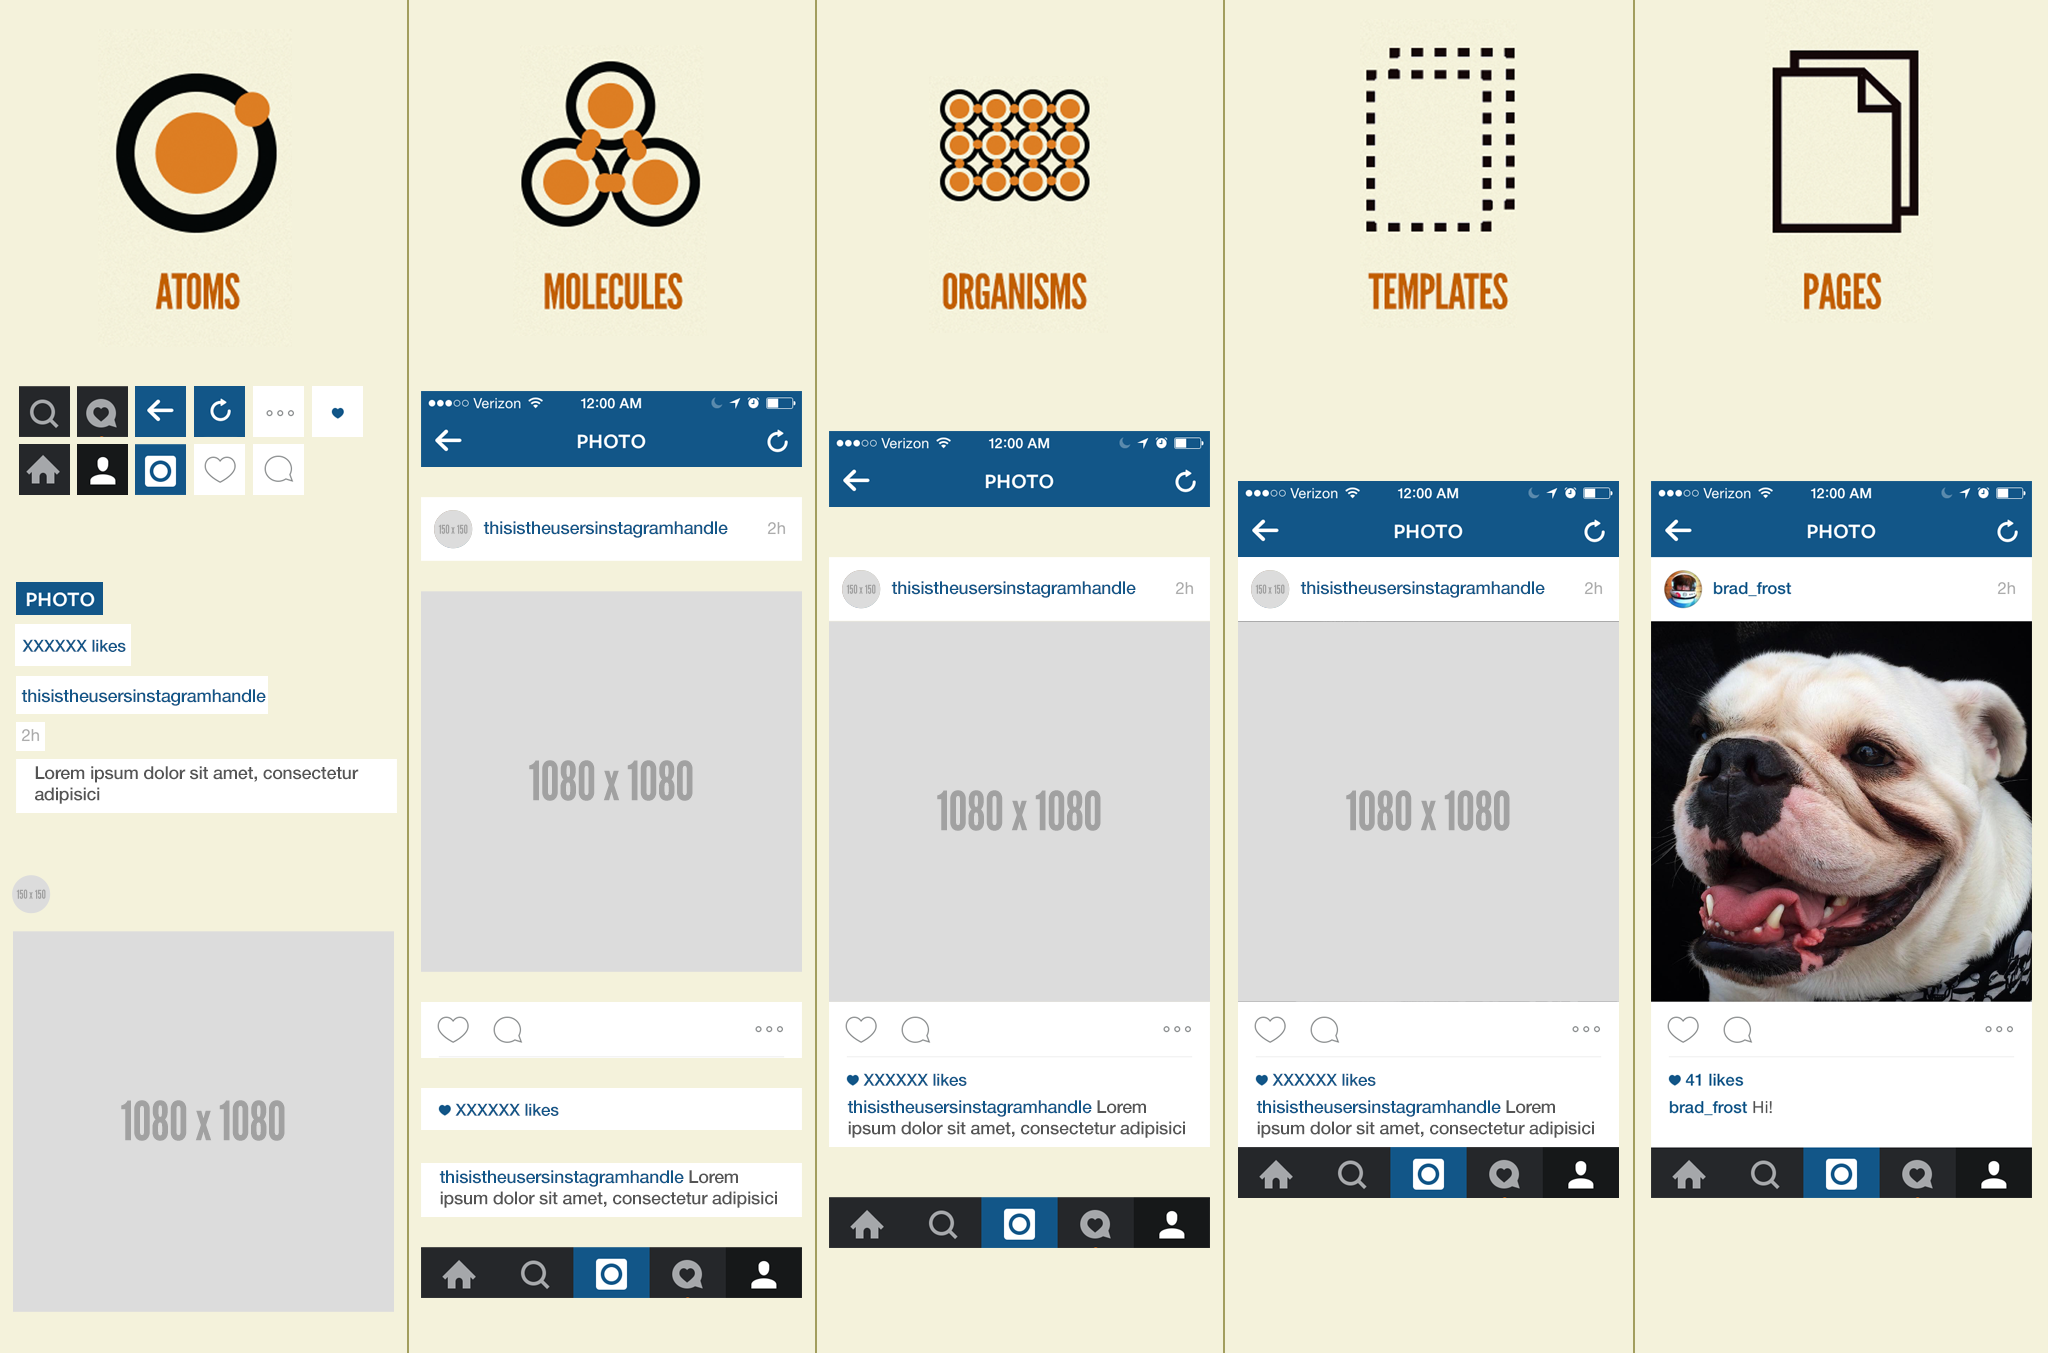 Atomic design applied to the native mobile app Instagram.